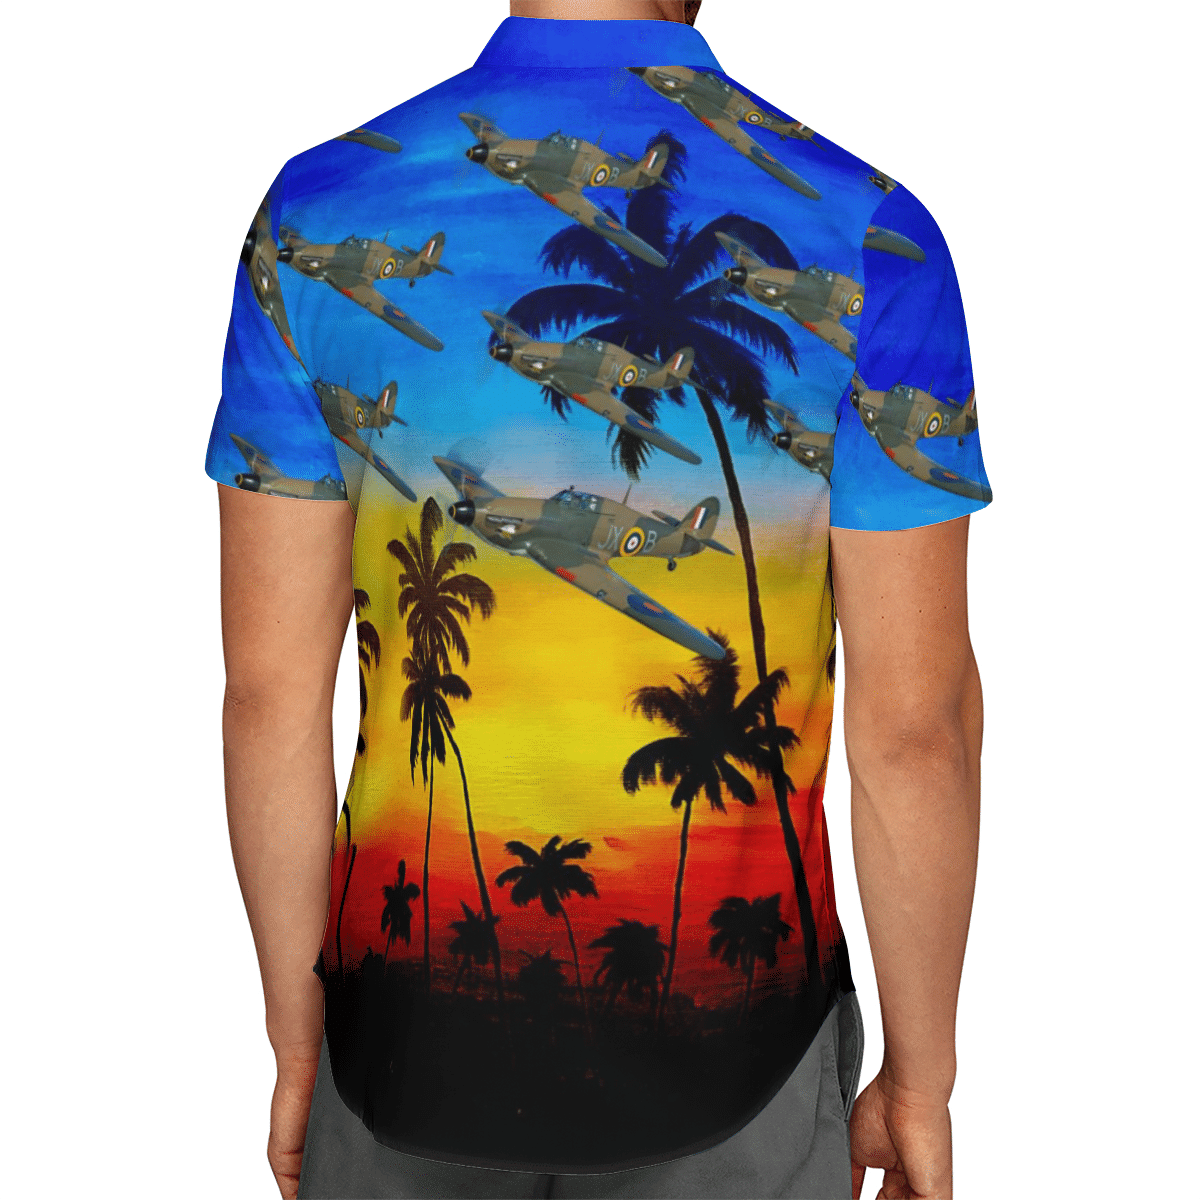 Going to the beach with a quality shirt 139